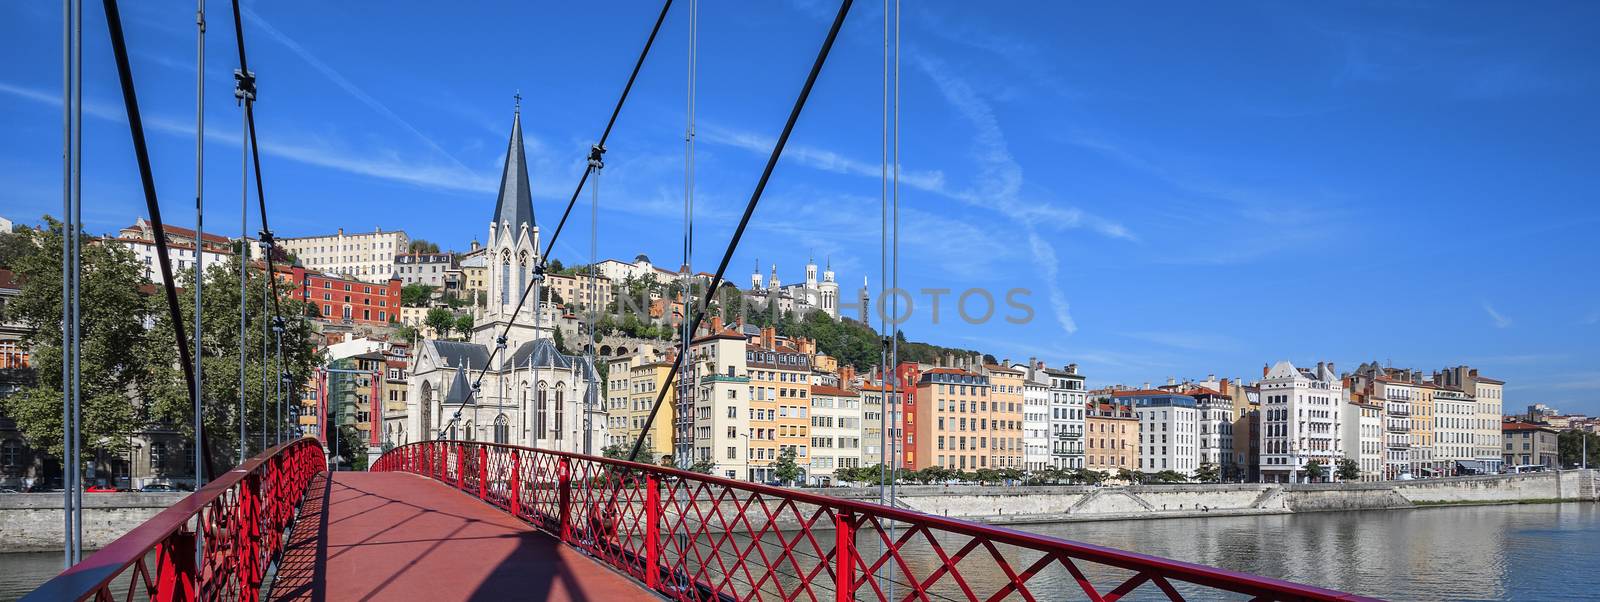 Lyon city with red footbridge on Saone river by vwalakte